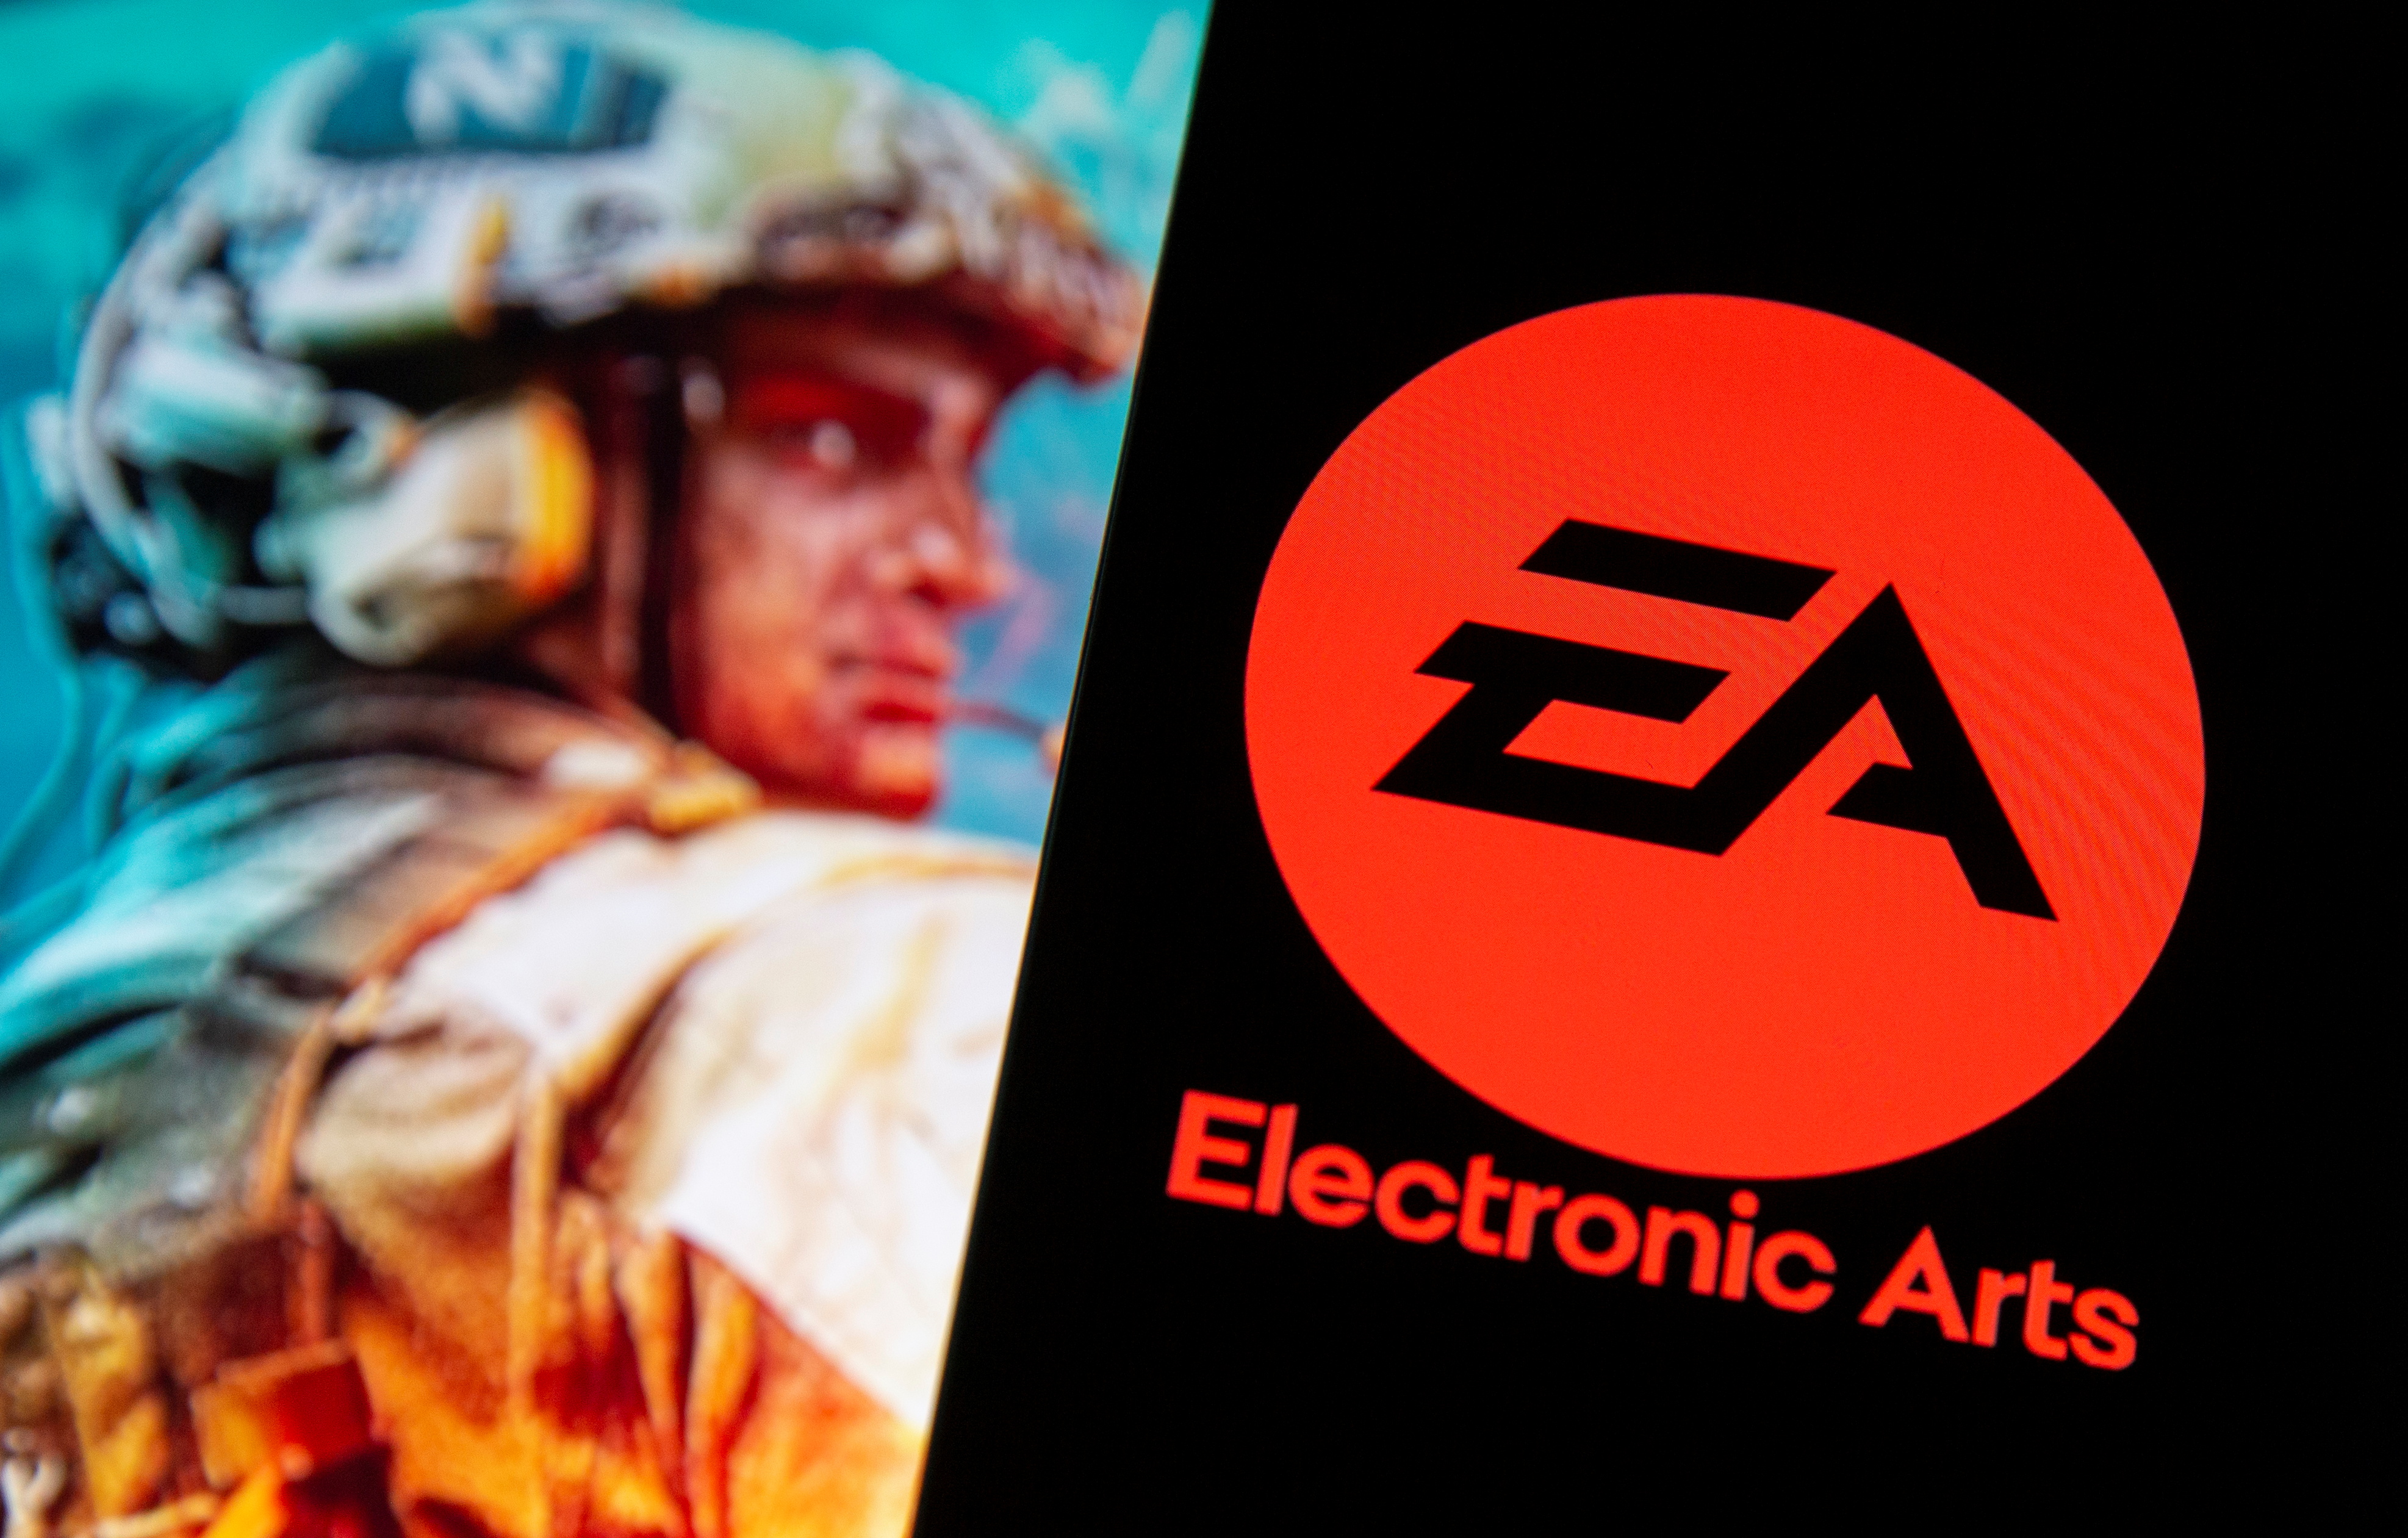 A smartphone with the Electronic Arts logo is seen in front of a displayed character from the Battlefield 2042 game in this illustration